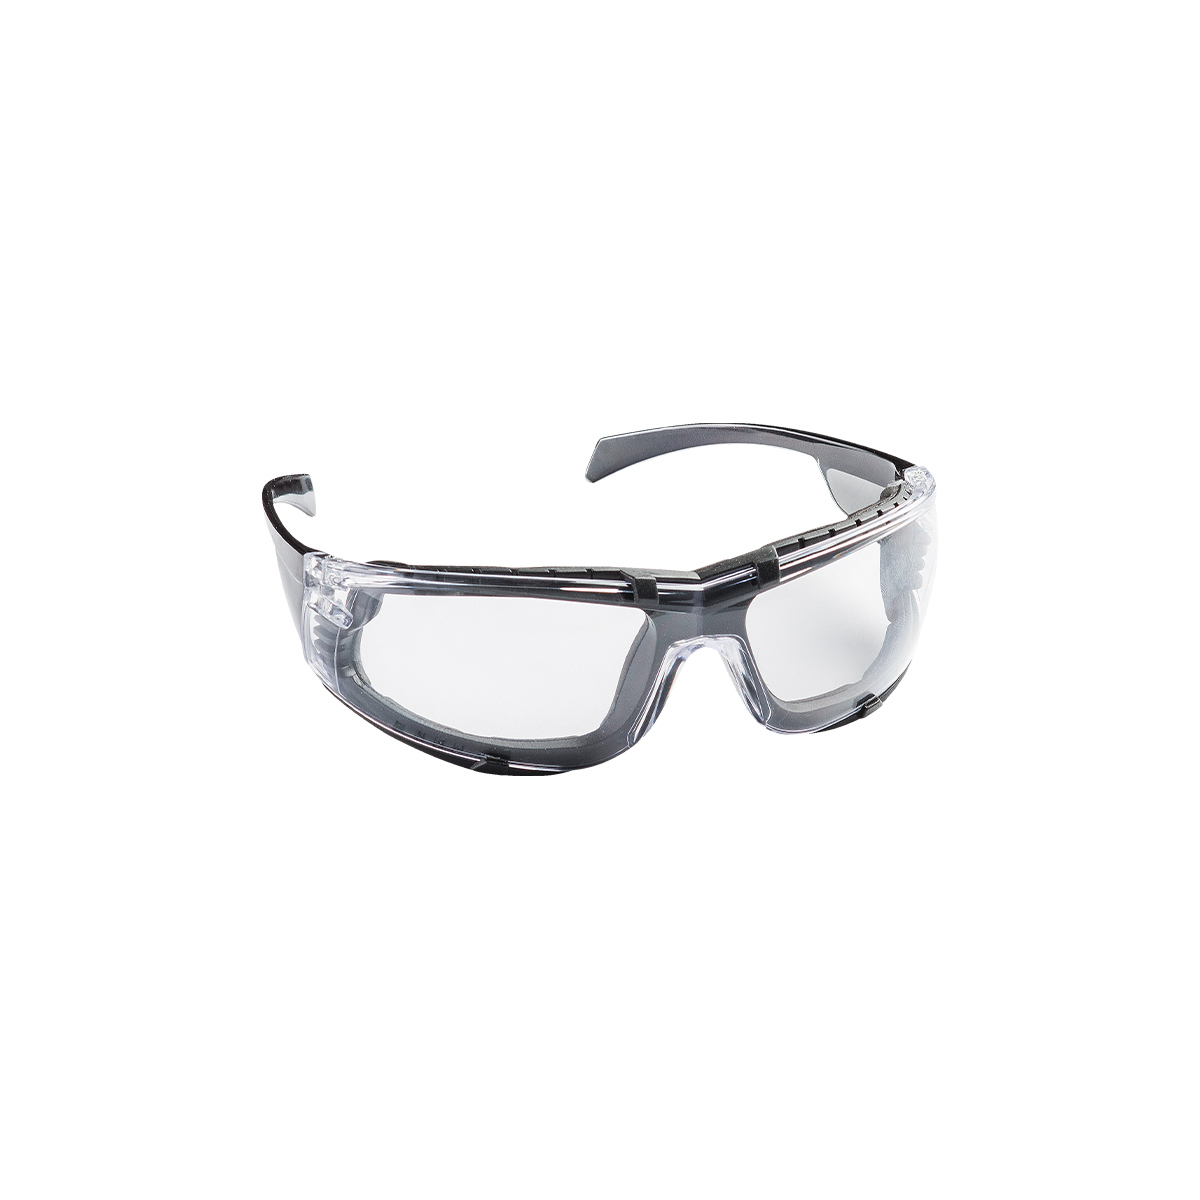 SAFETY GLASSES WITH SIDE SHIELDS